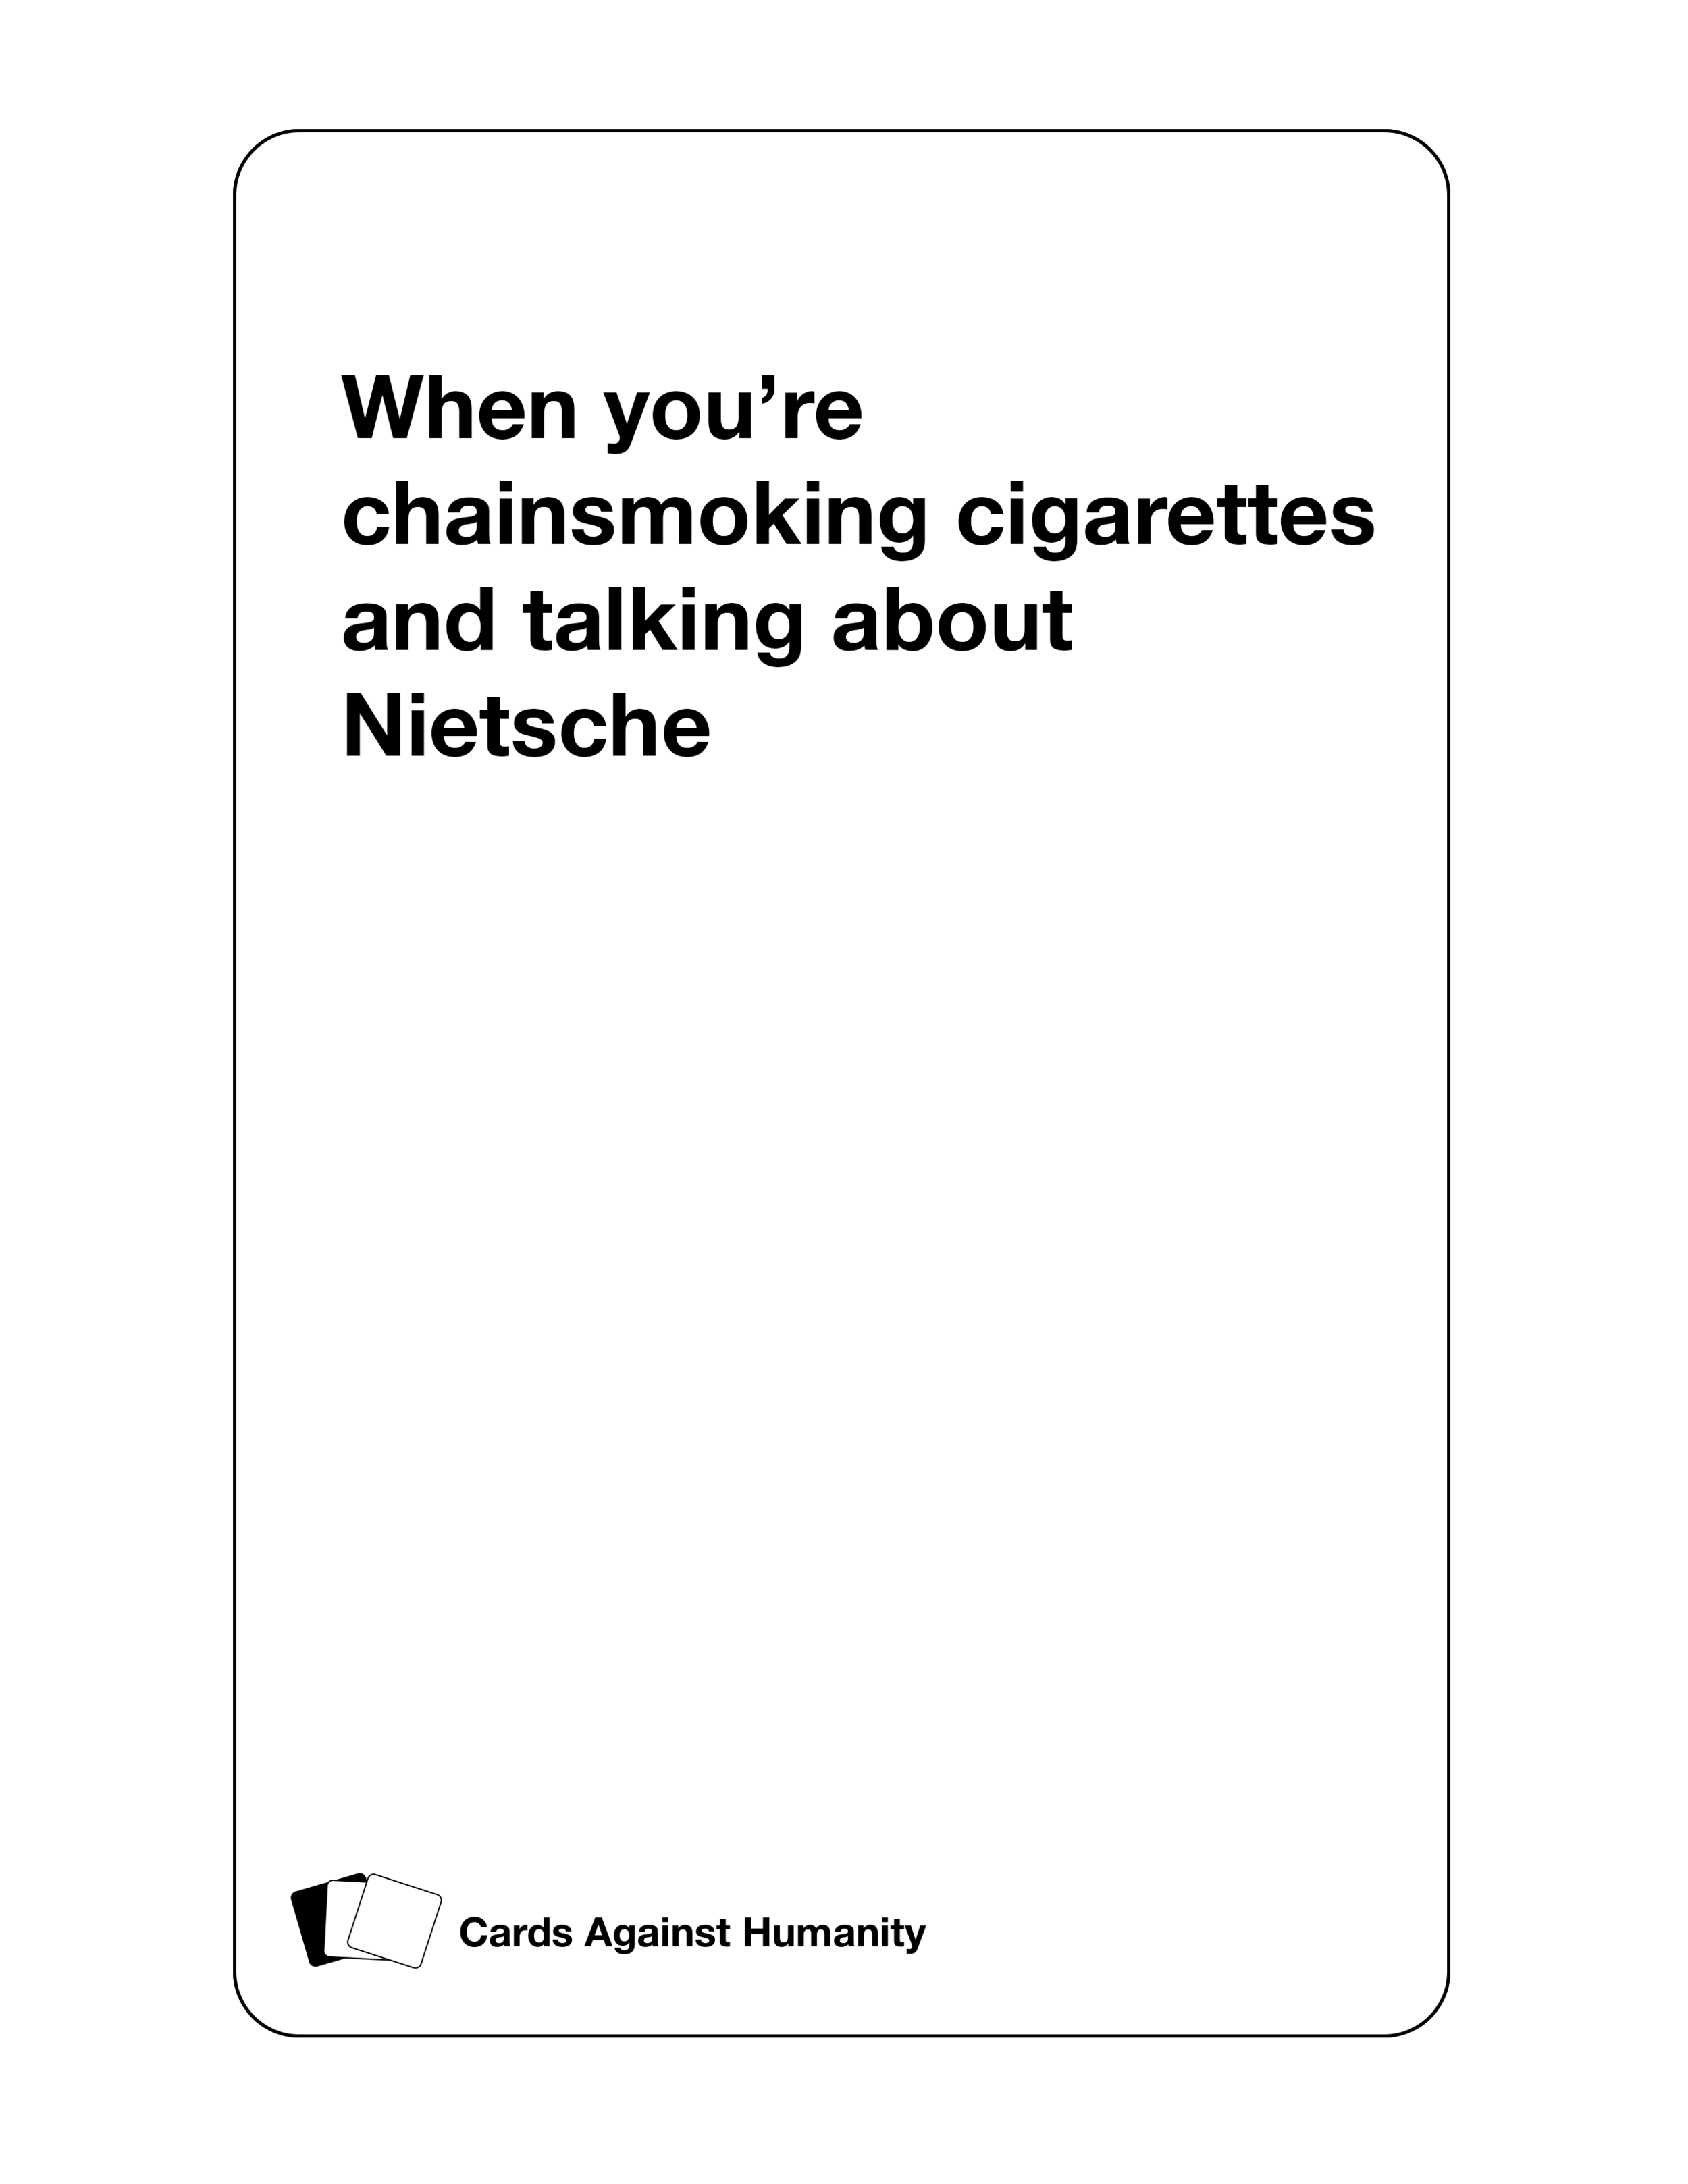 CAH_ConsentPack_Cards_Response23.png